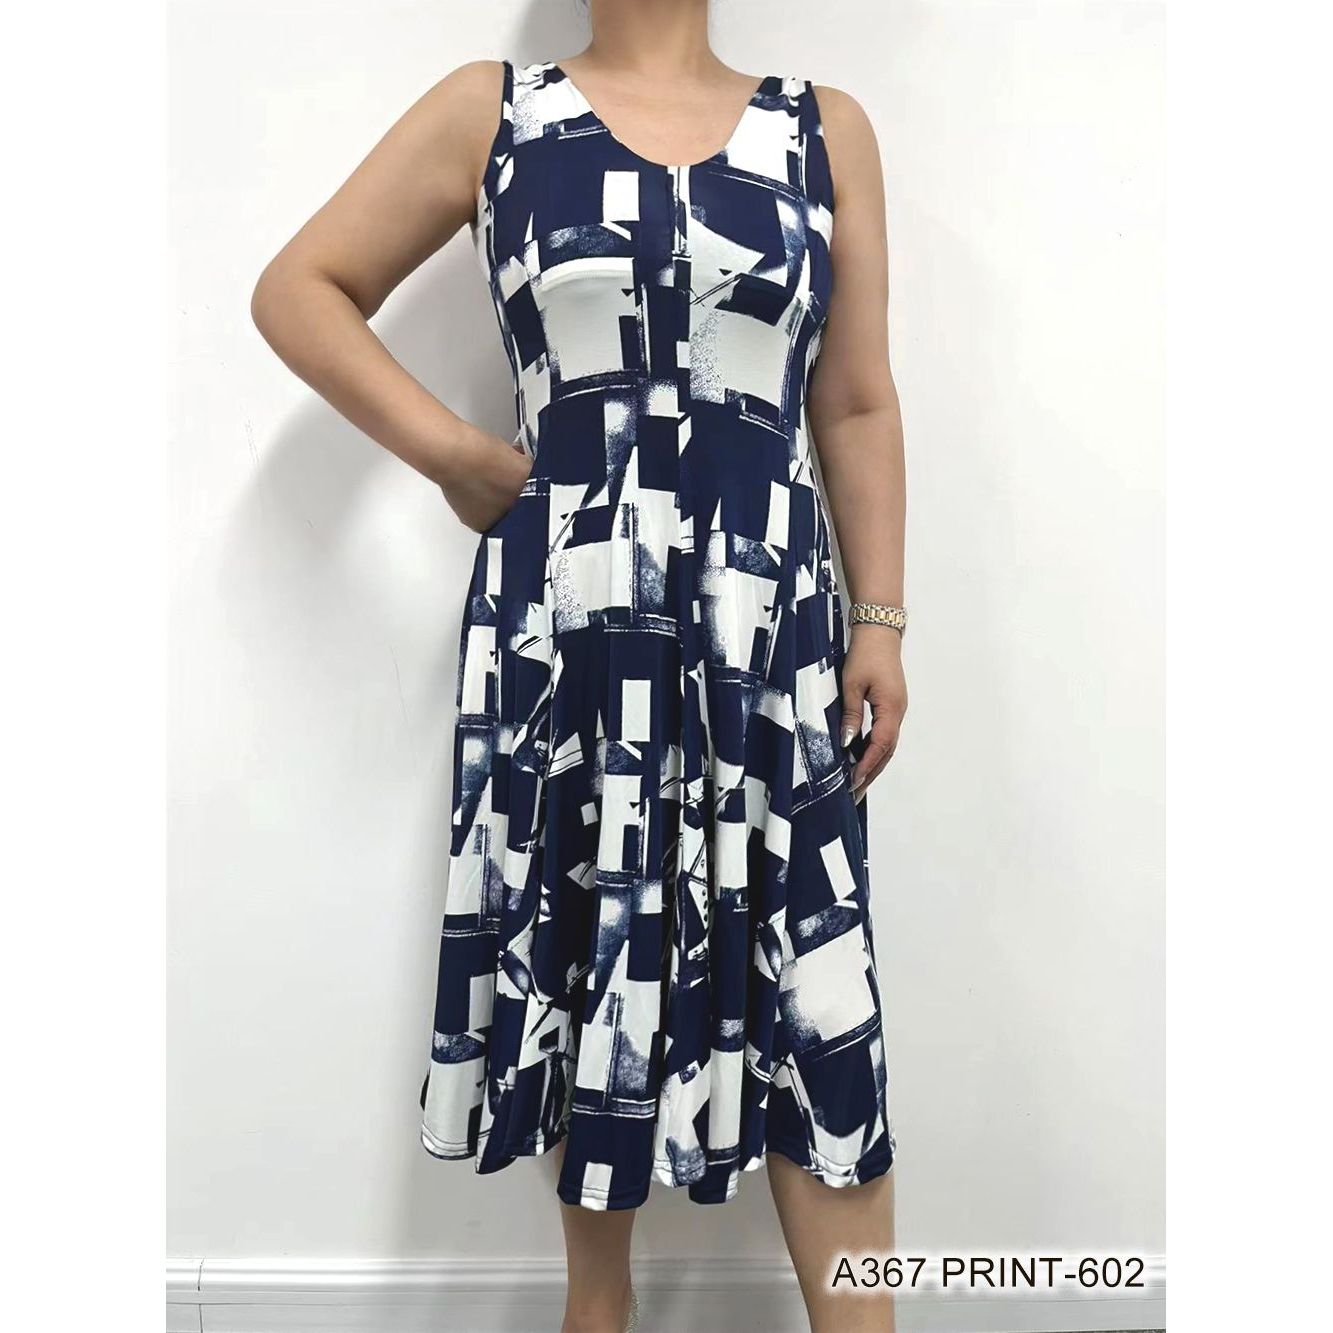 Printed Dress with Pleats Top Seller